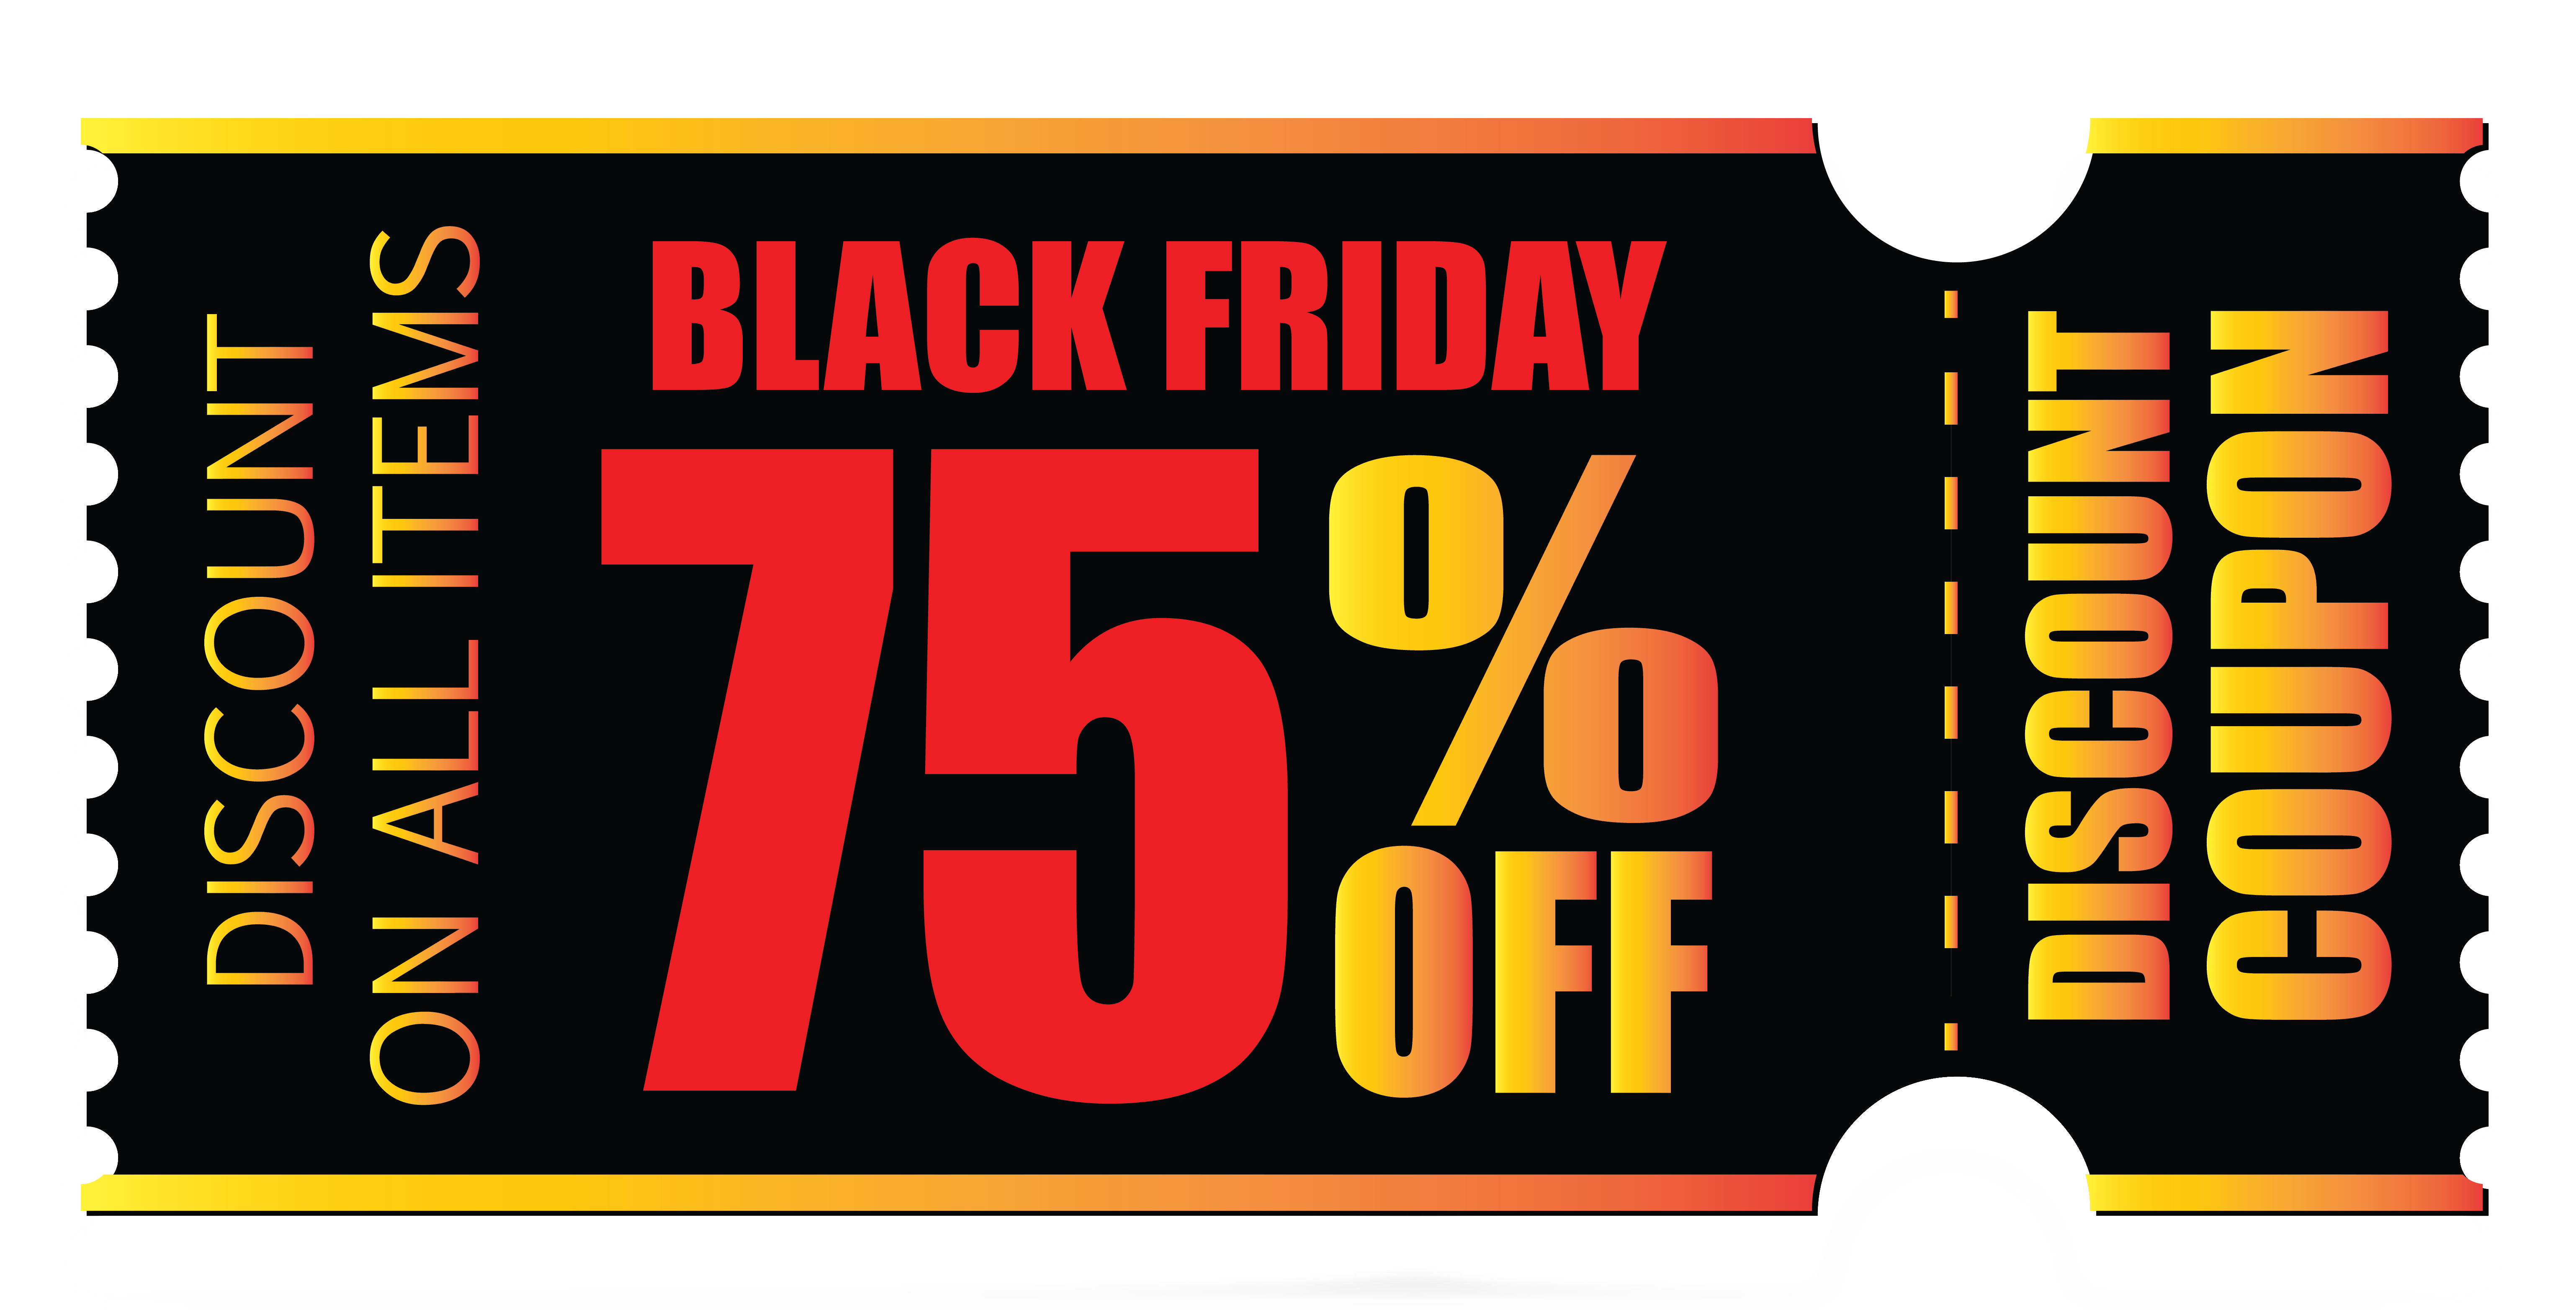 Download Black Friday Coupon PNG Clipart Image | Gallery ...